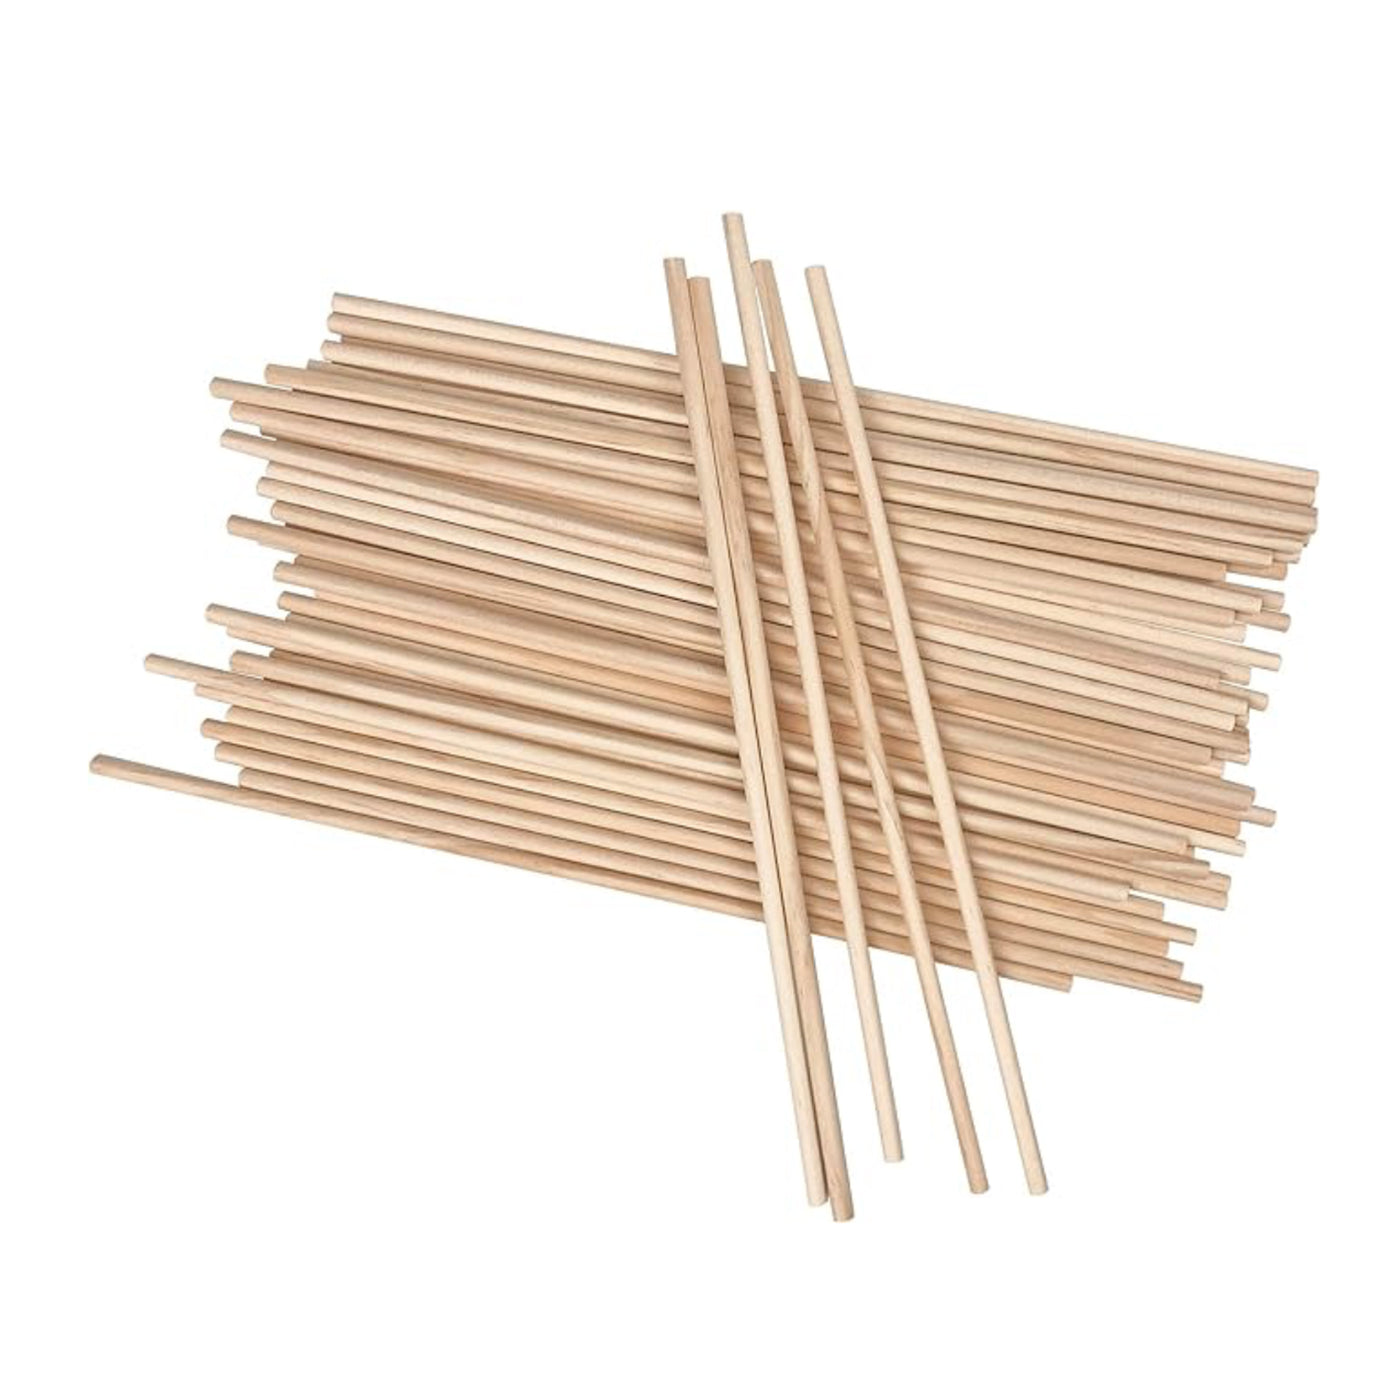 Additional Sticks for School Flags